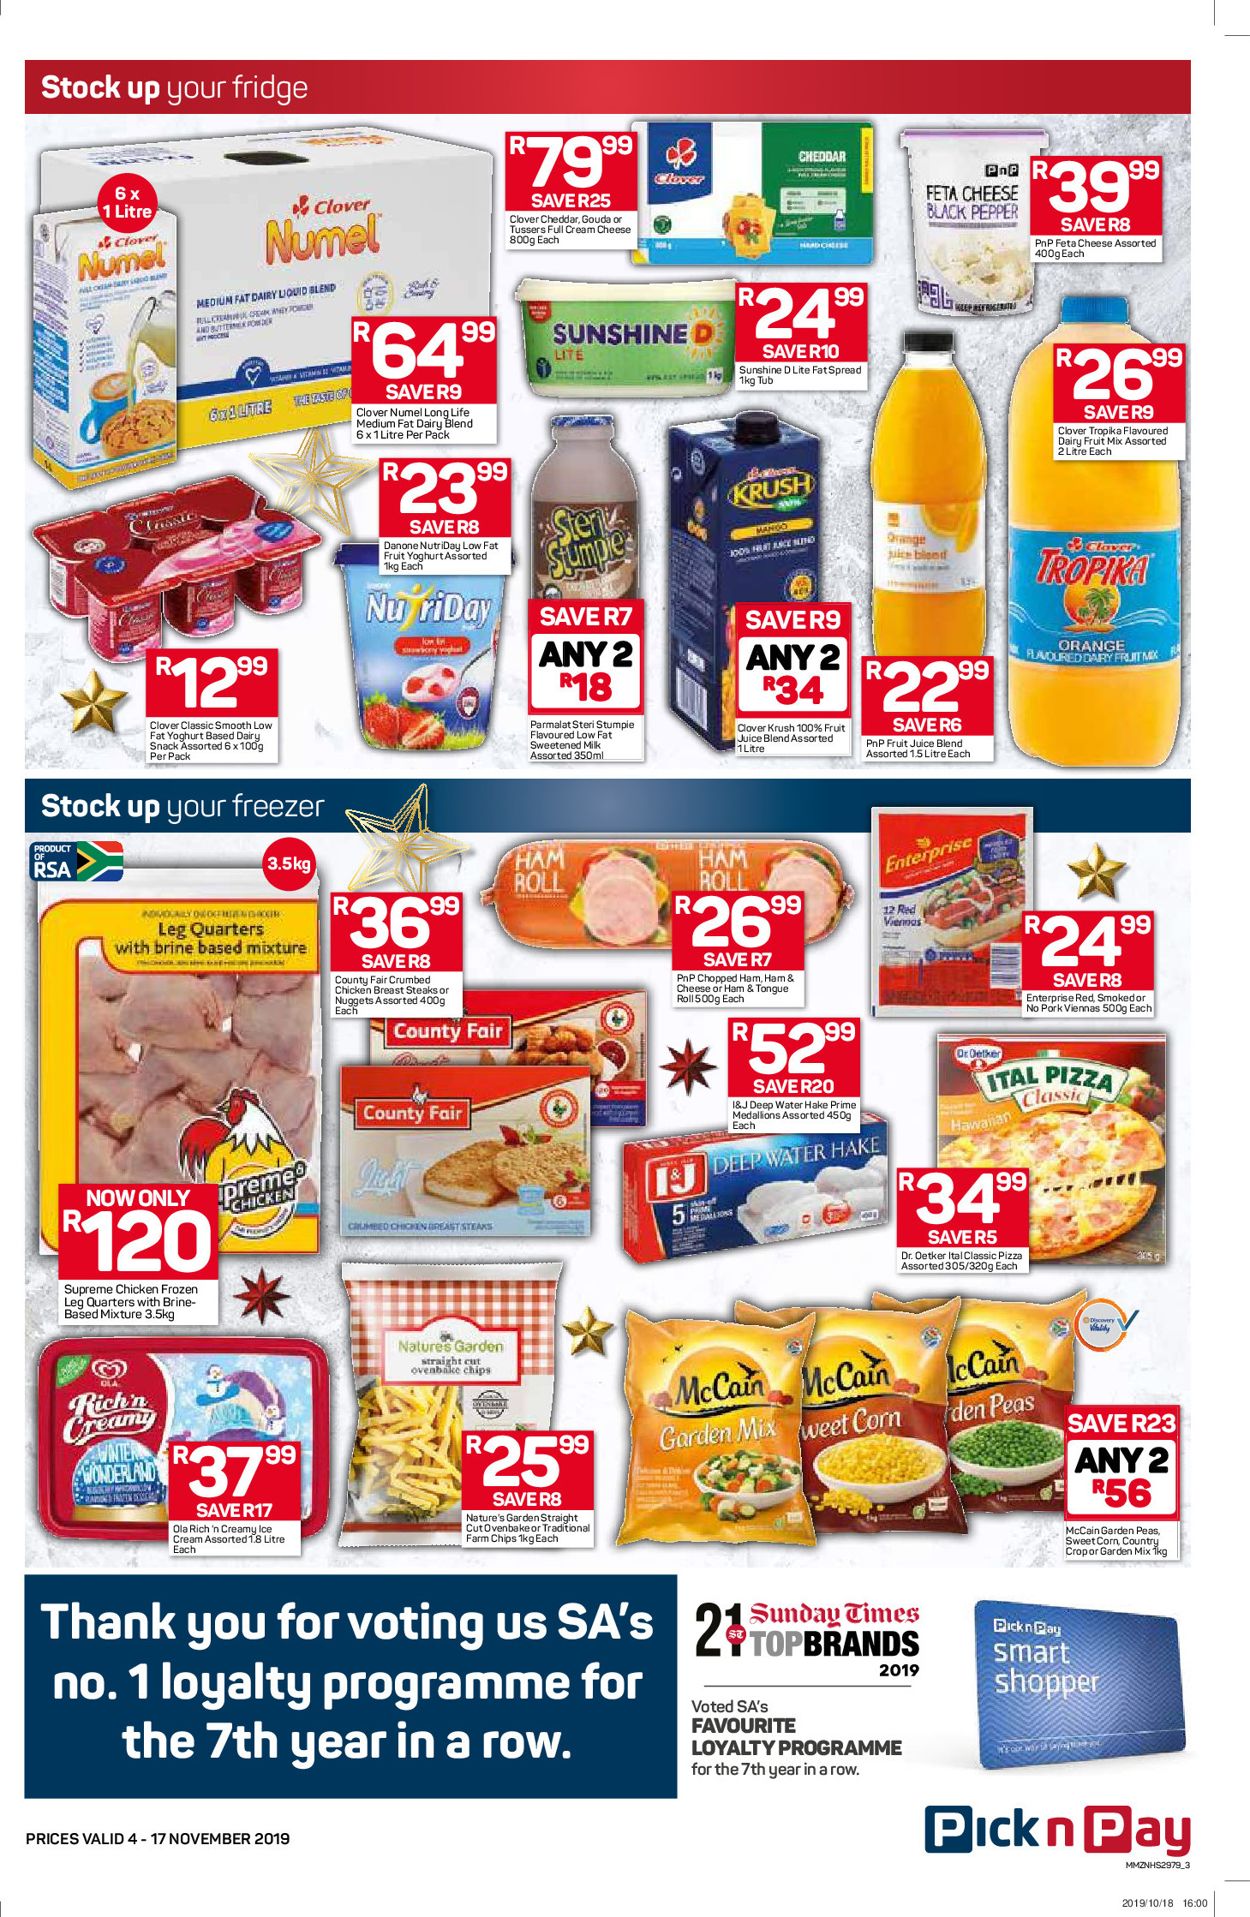 Pick n Pay Catalogue - 2019/11/04-2019/12/29 (Page 5)